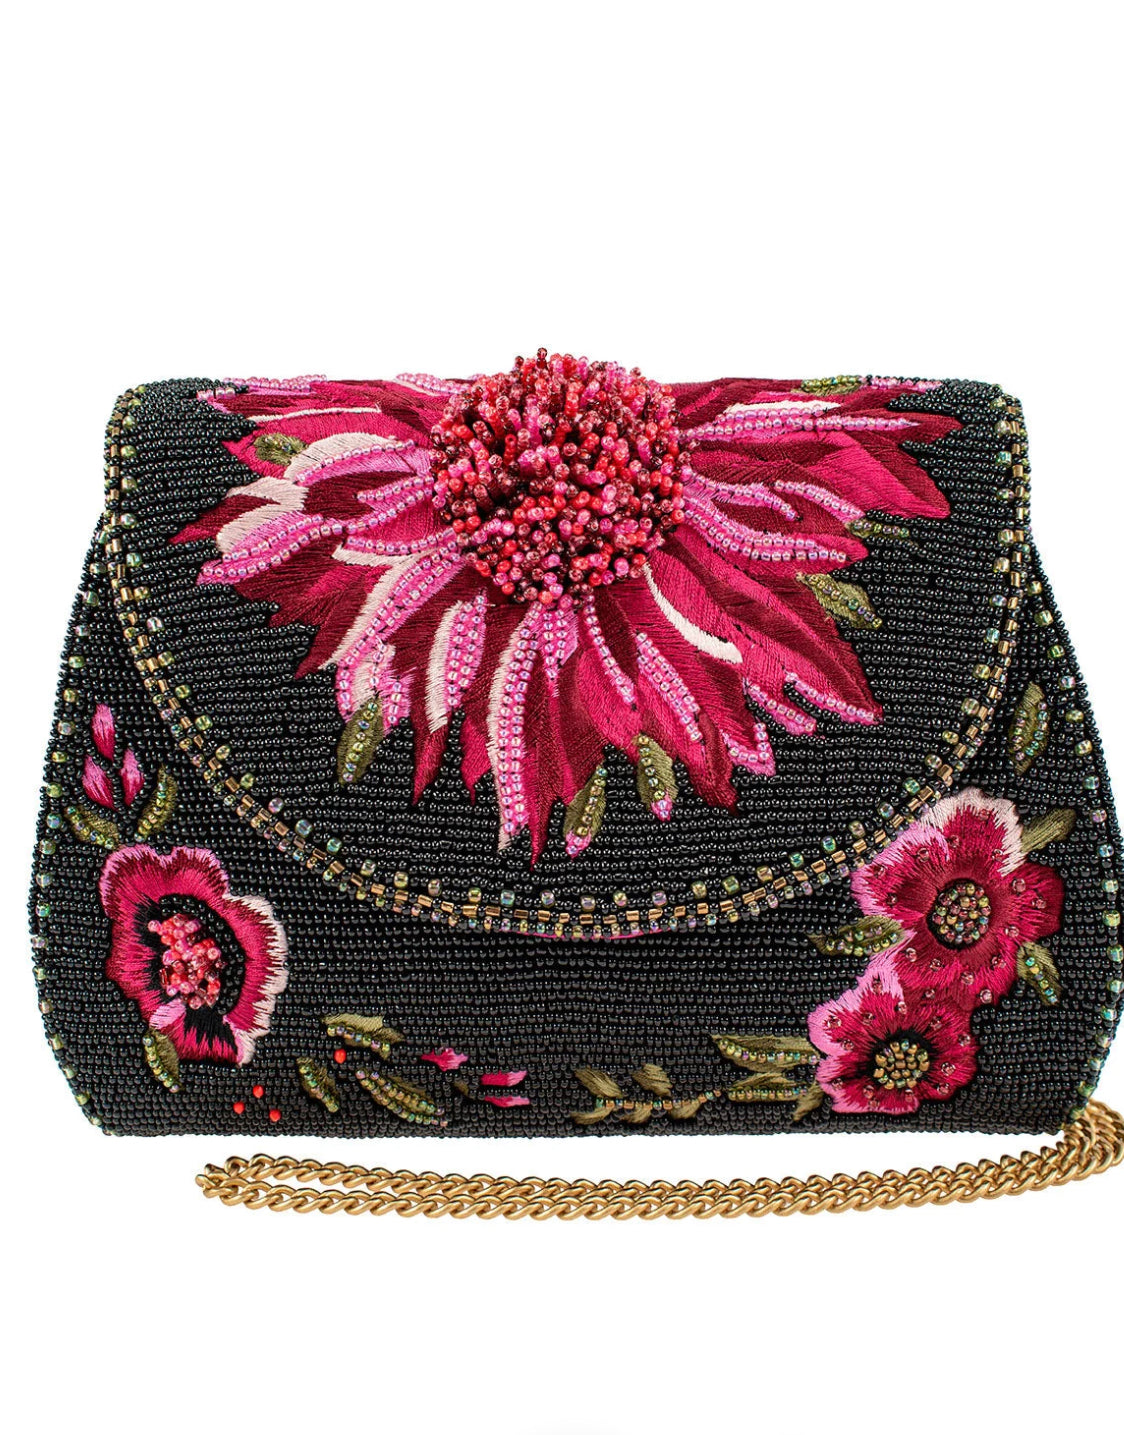 MARY PRETTY IN PINK CLUTCH